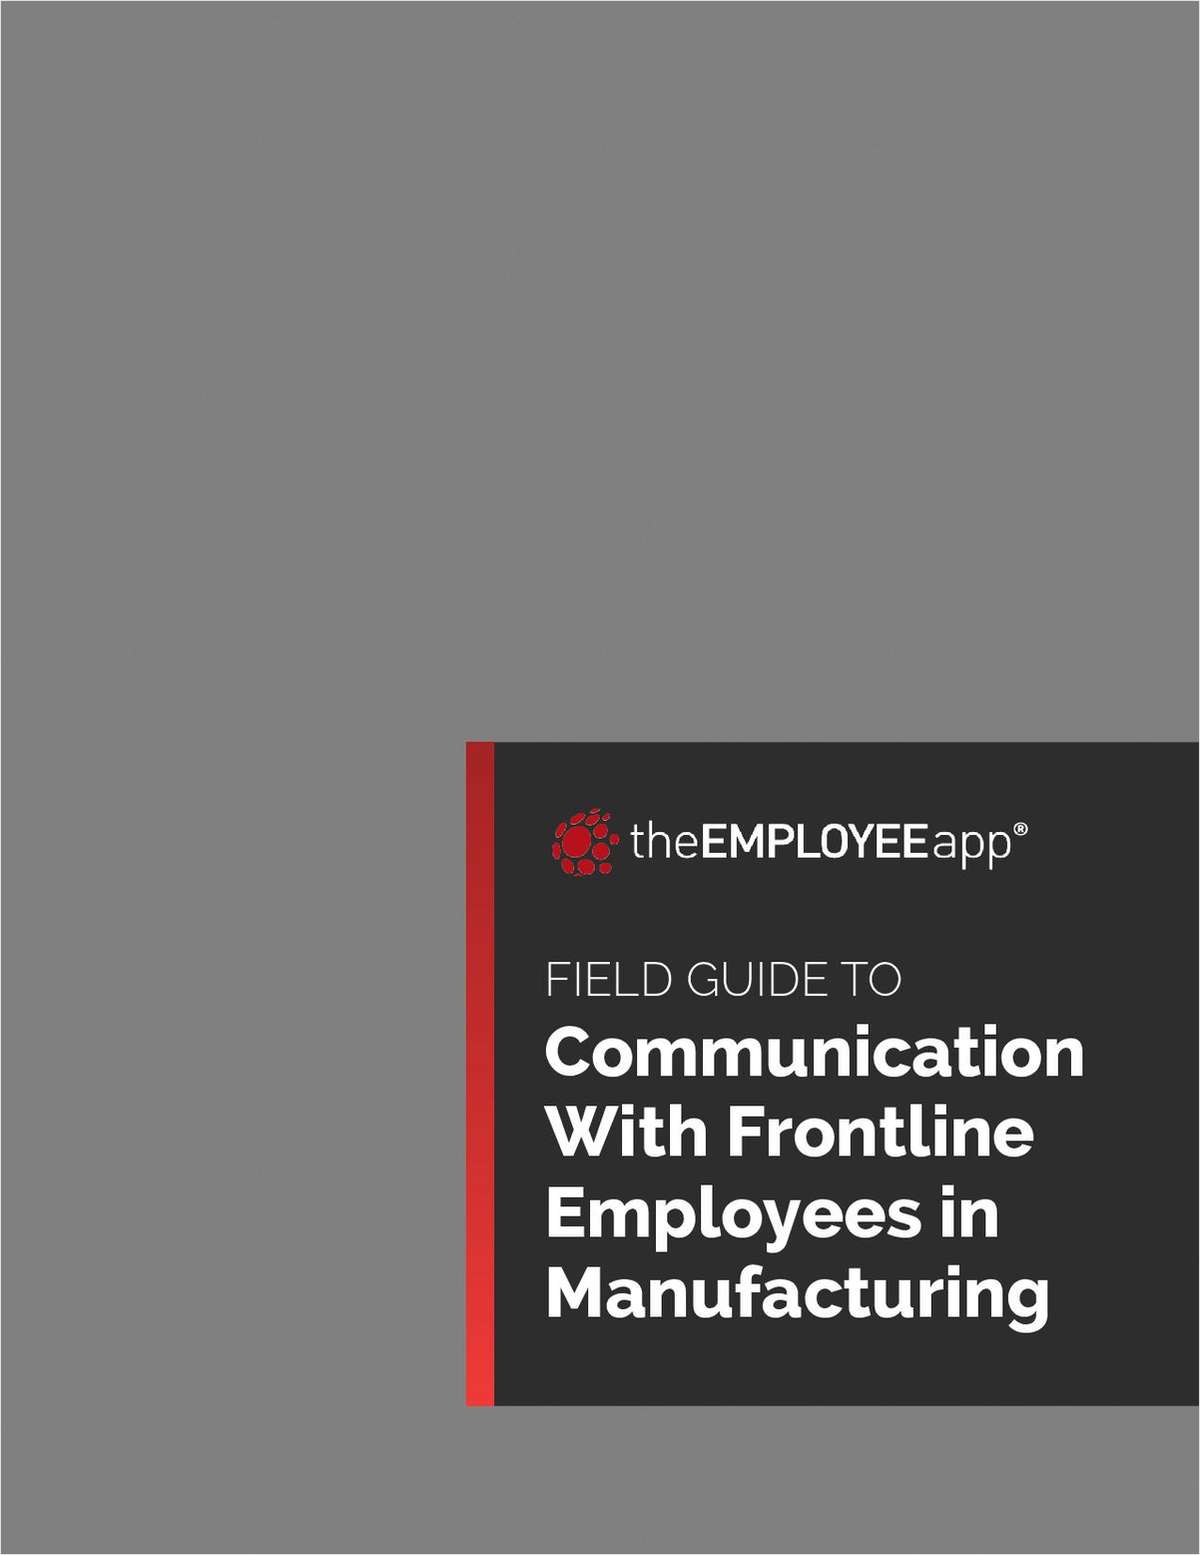 Field Guide to Communication With Frontline Employees in Manufacturing